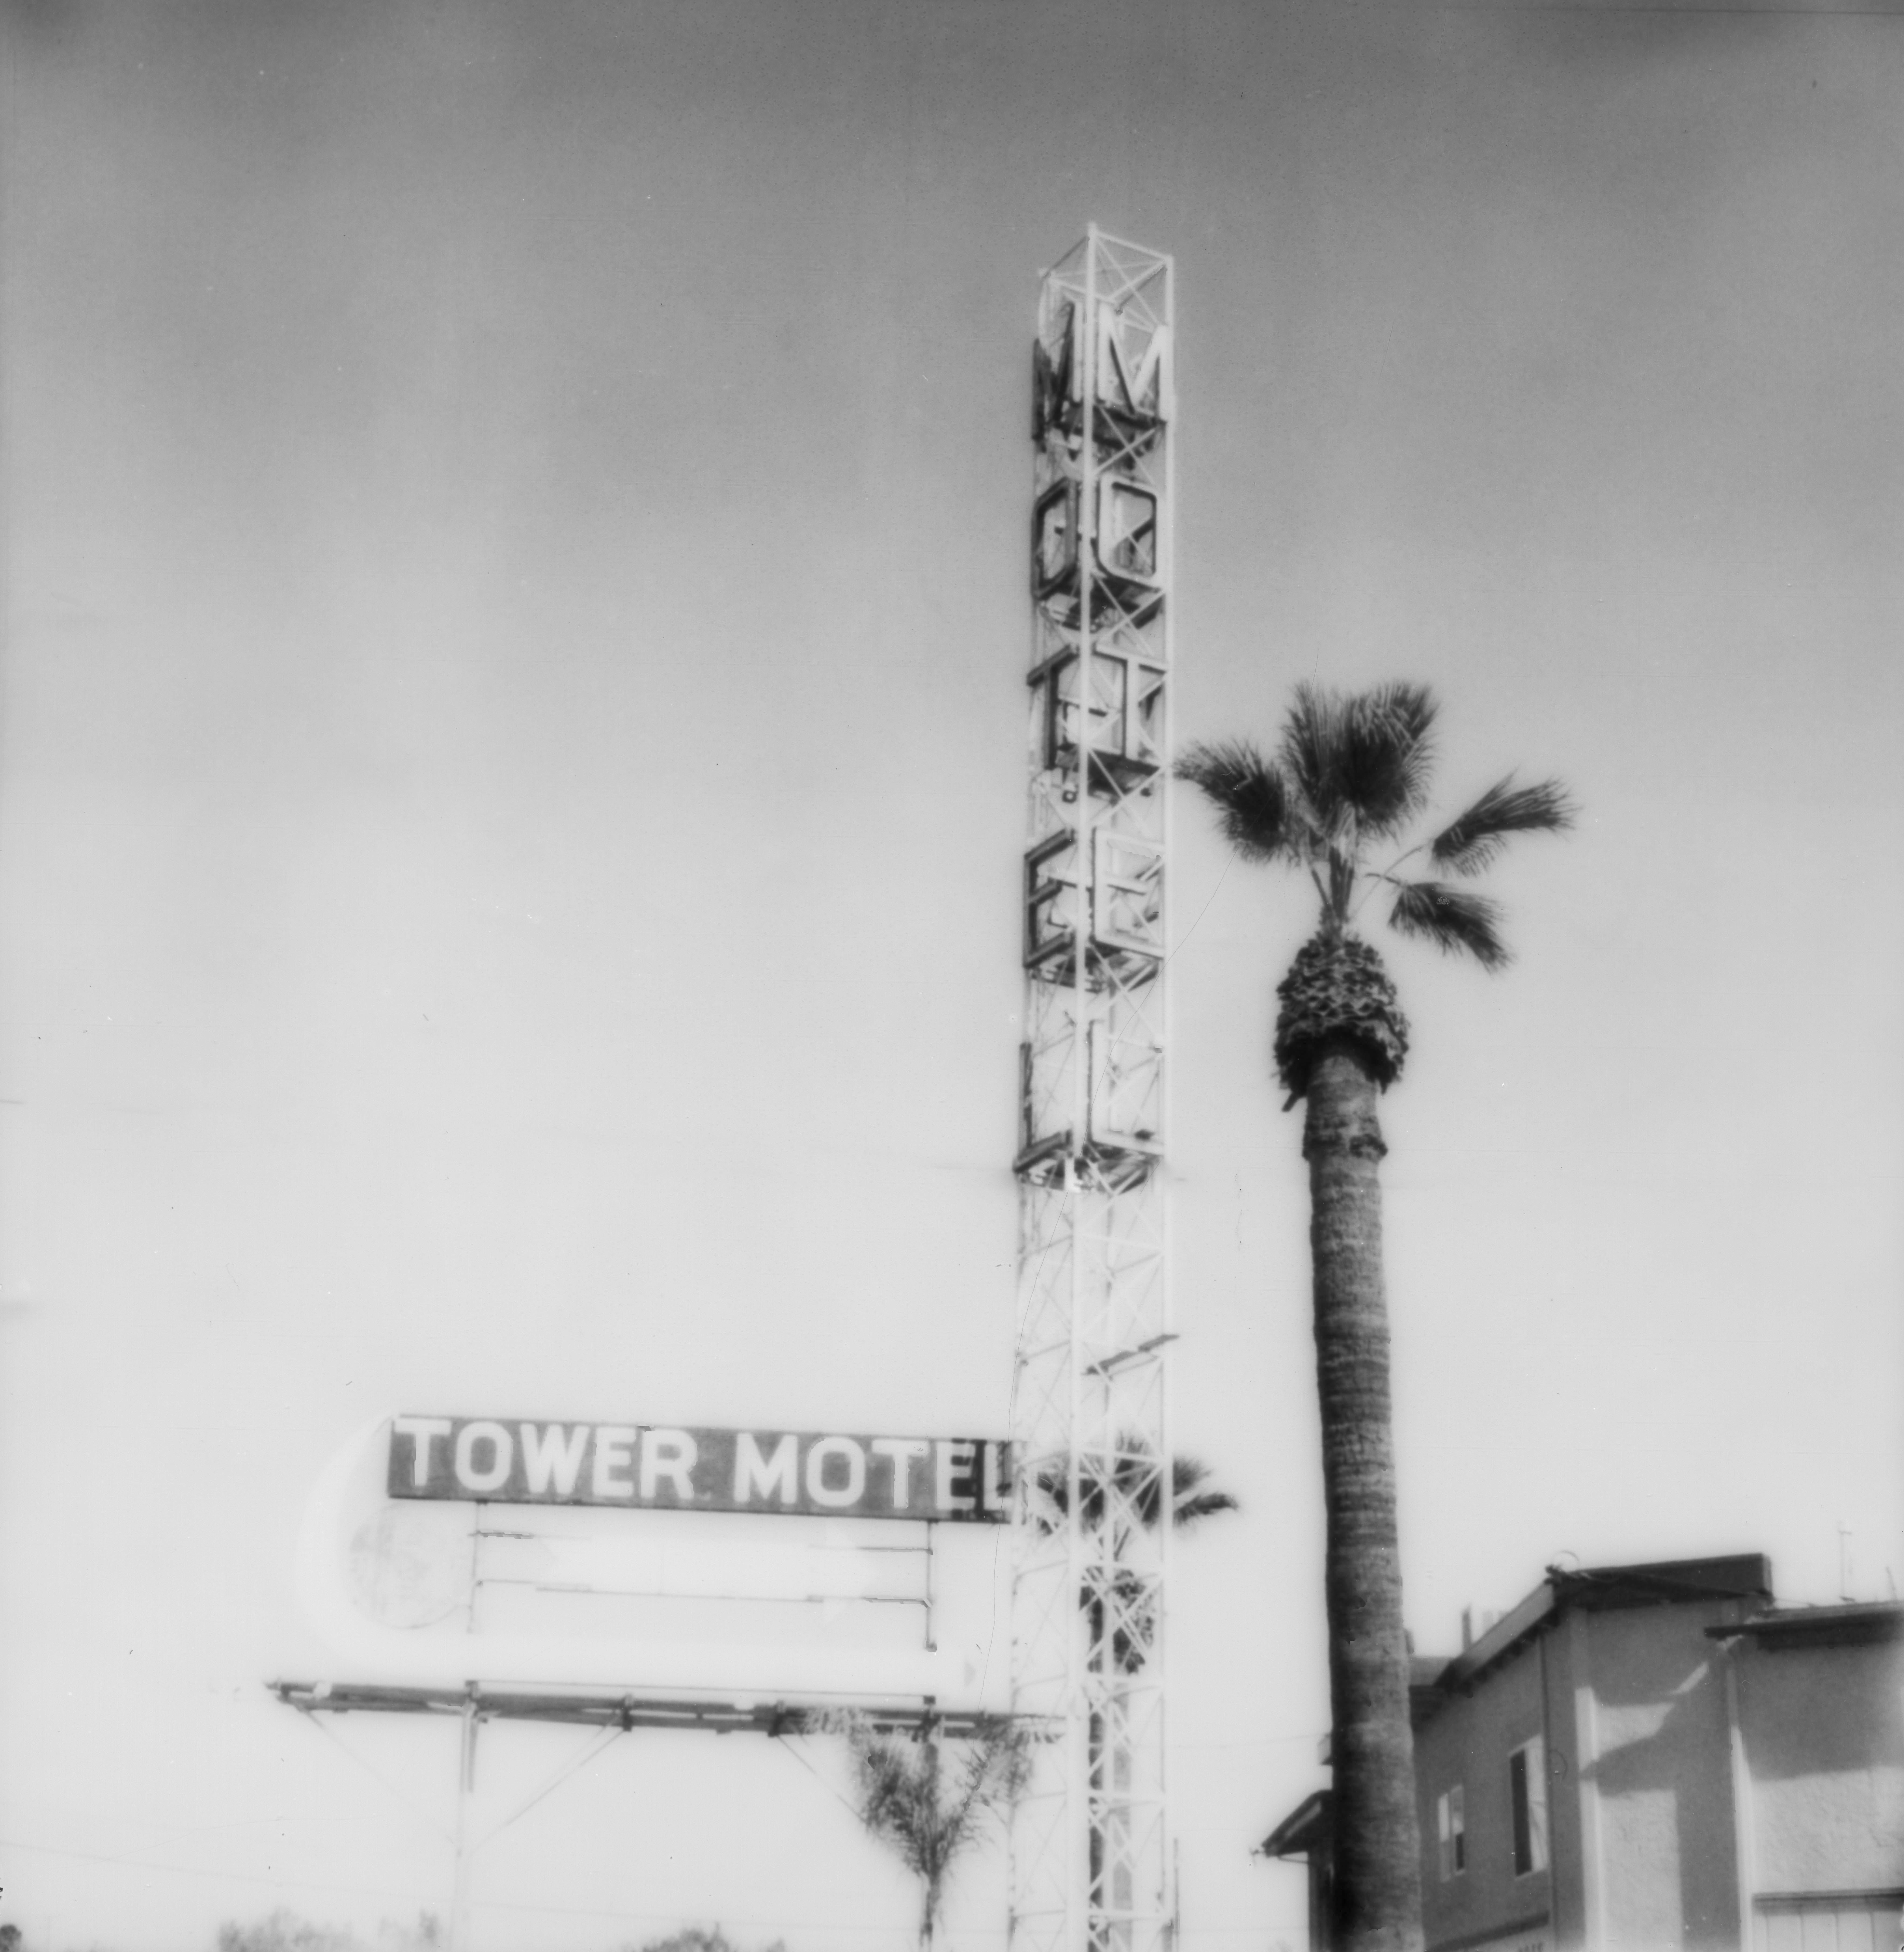 Erin Dougherty Black and White Photograph - Tower Motel 2 (Ghost Town) - 21st Century, Polaroid, Landscape